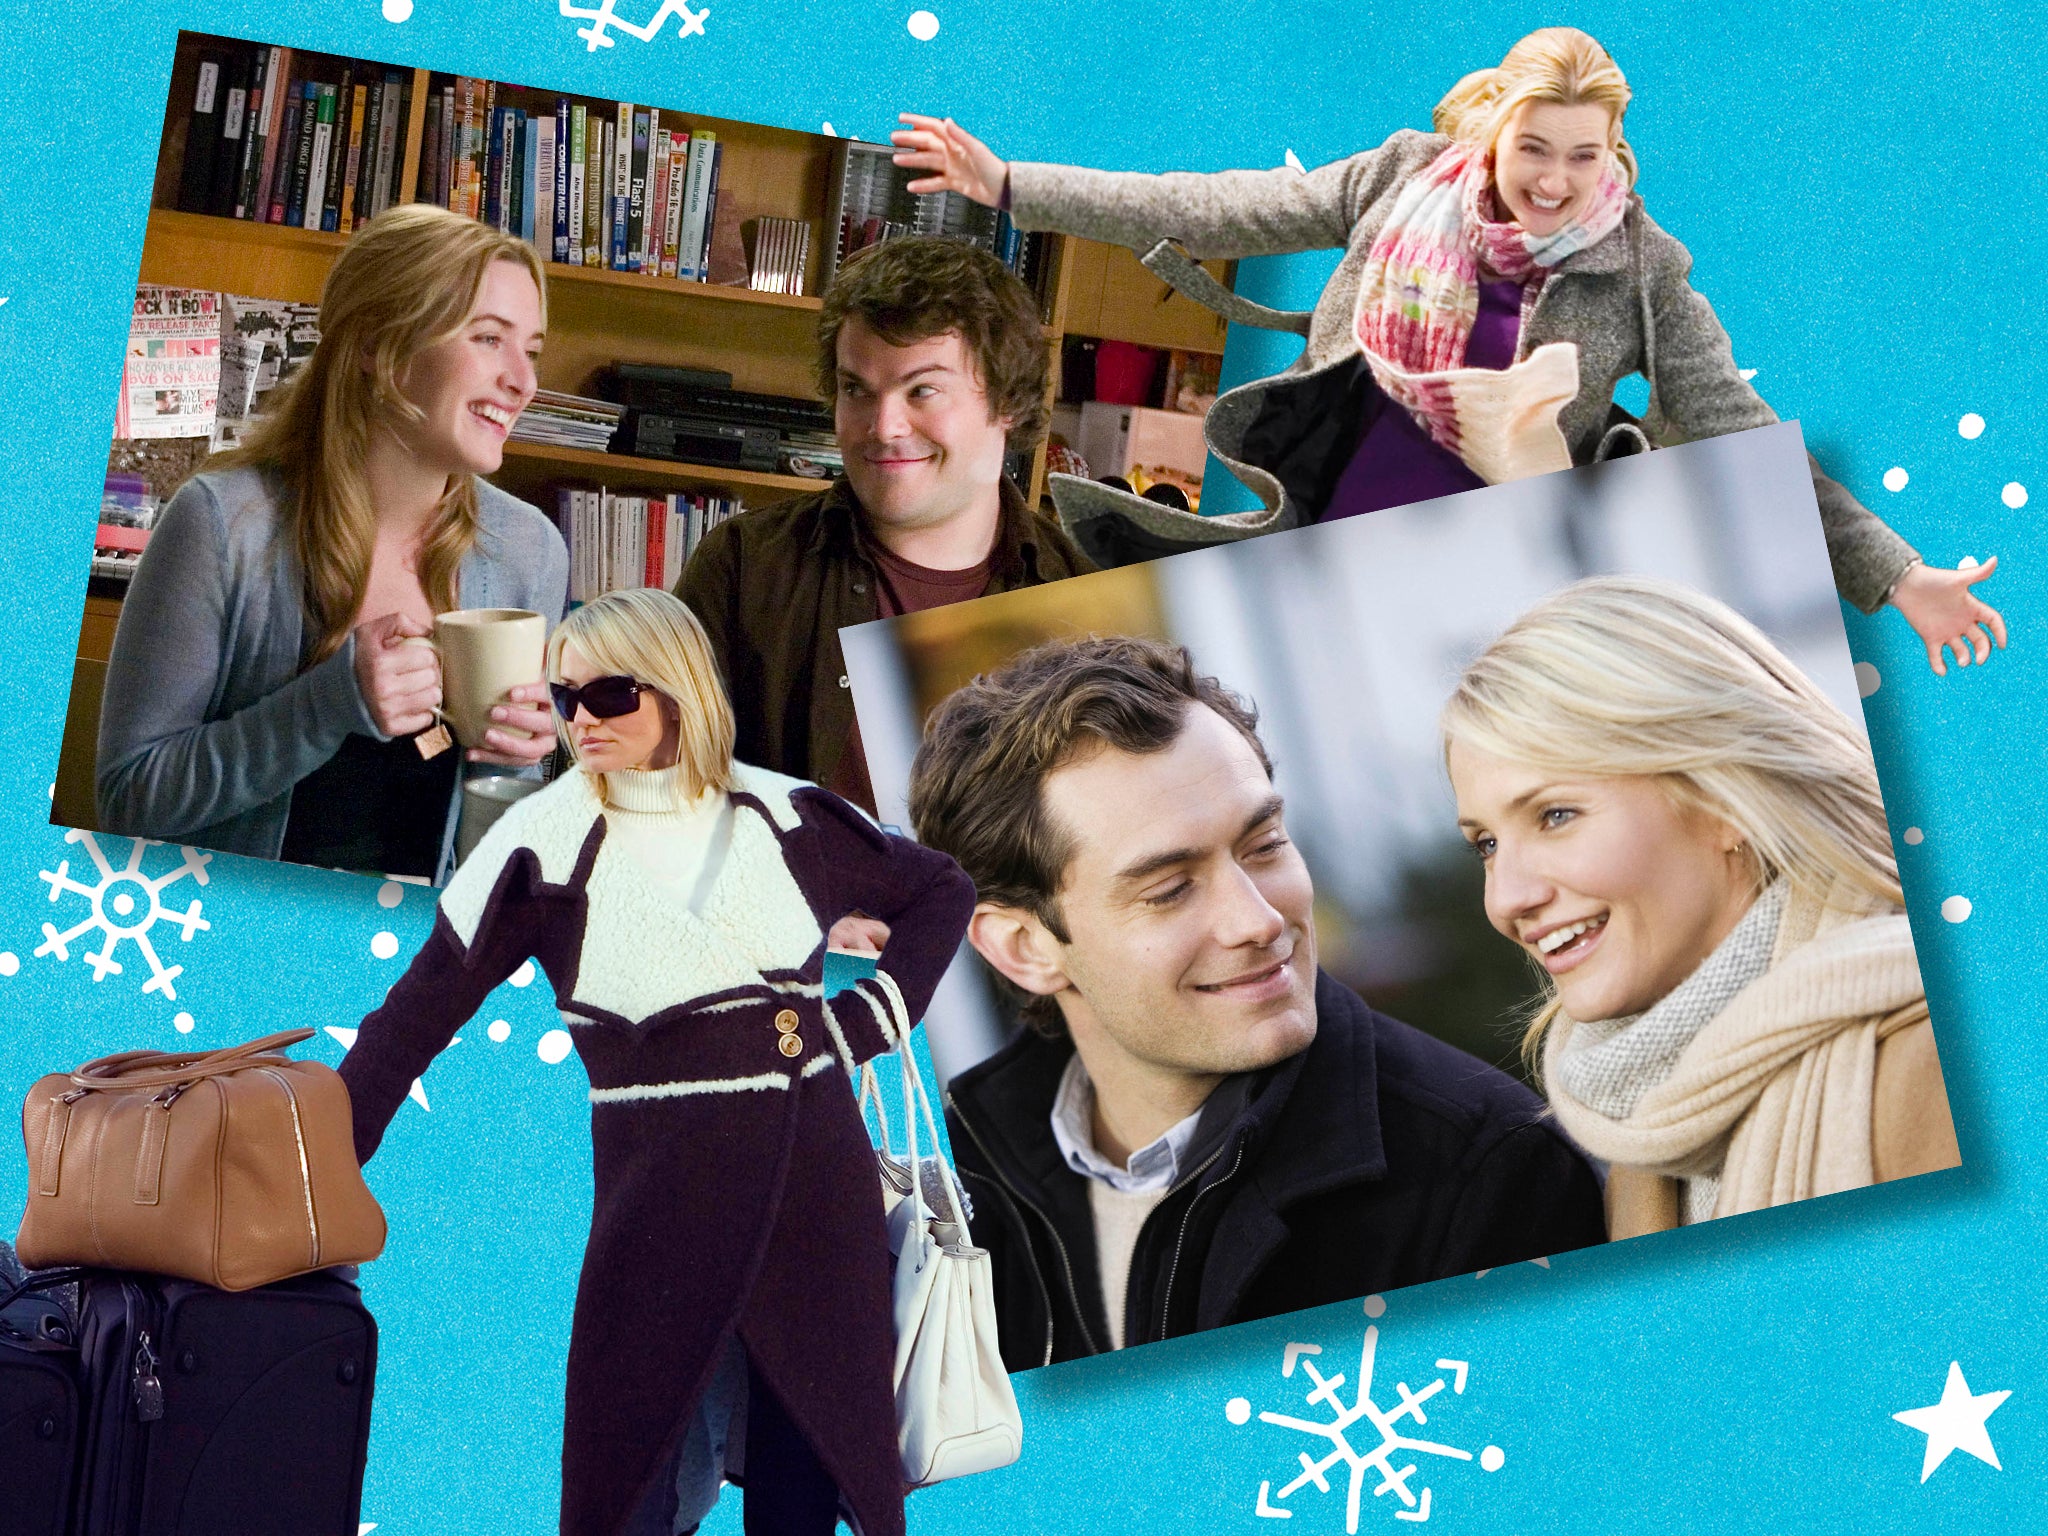 Christmas Day films When it comes to Christmas movies, The Holiday has a lot to answer for The Independent